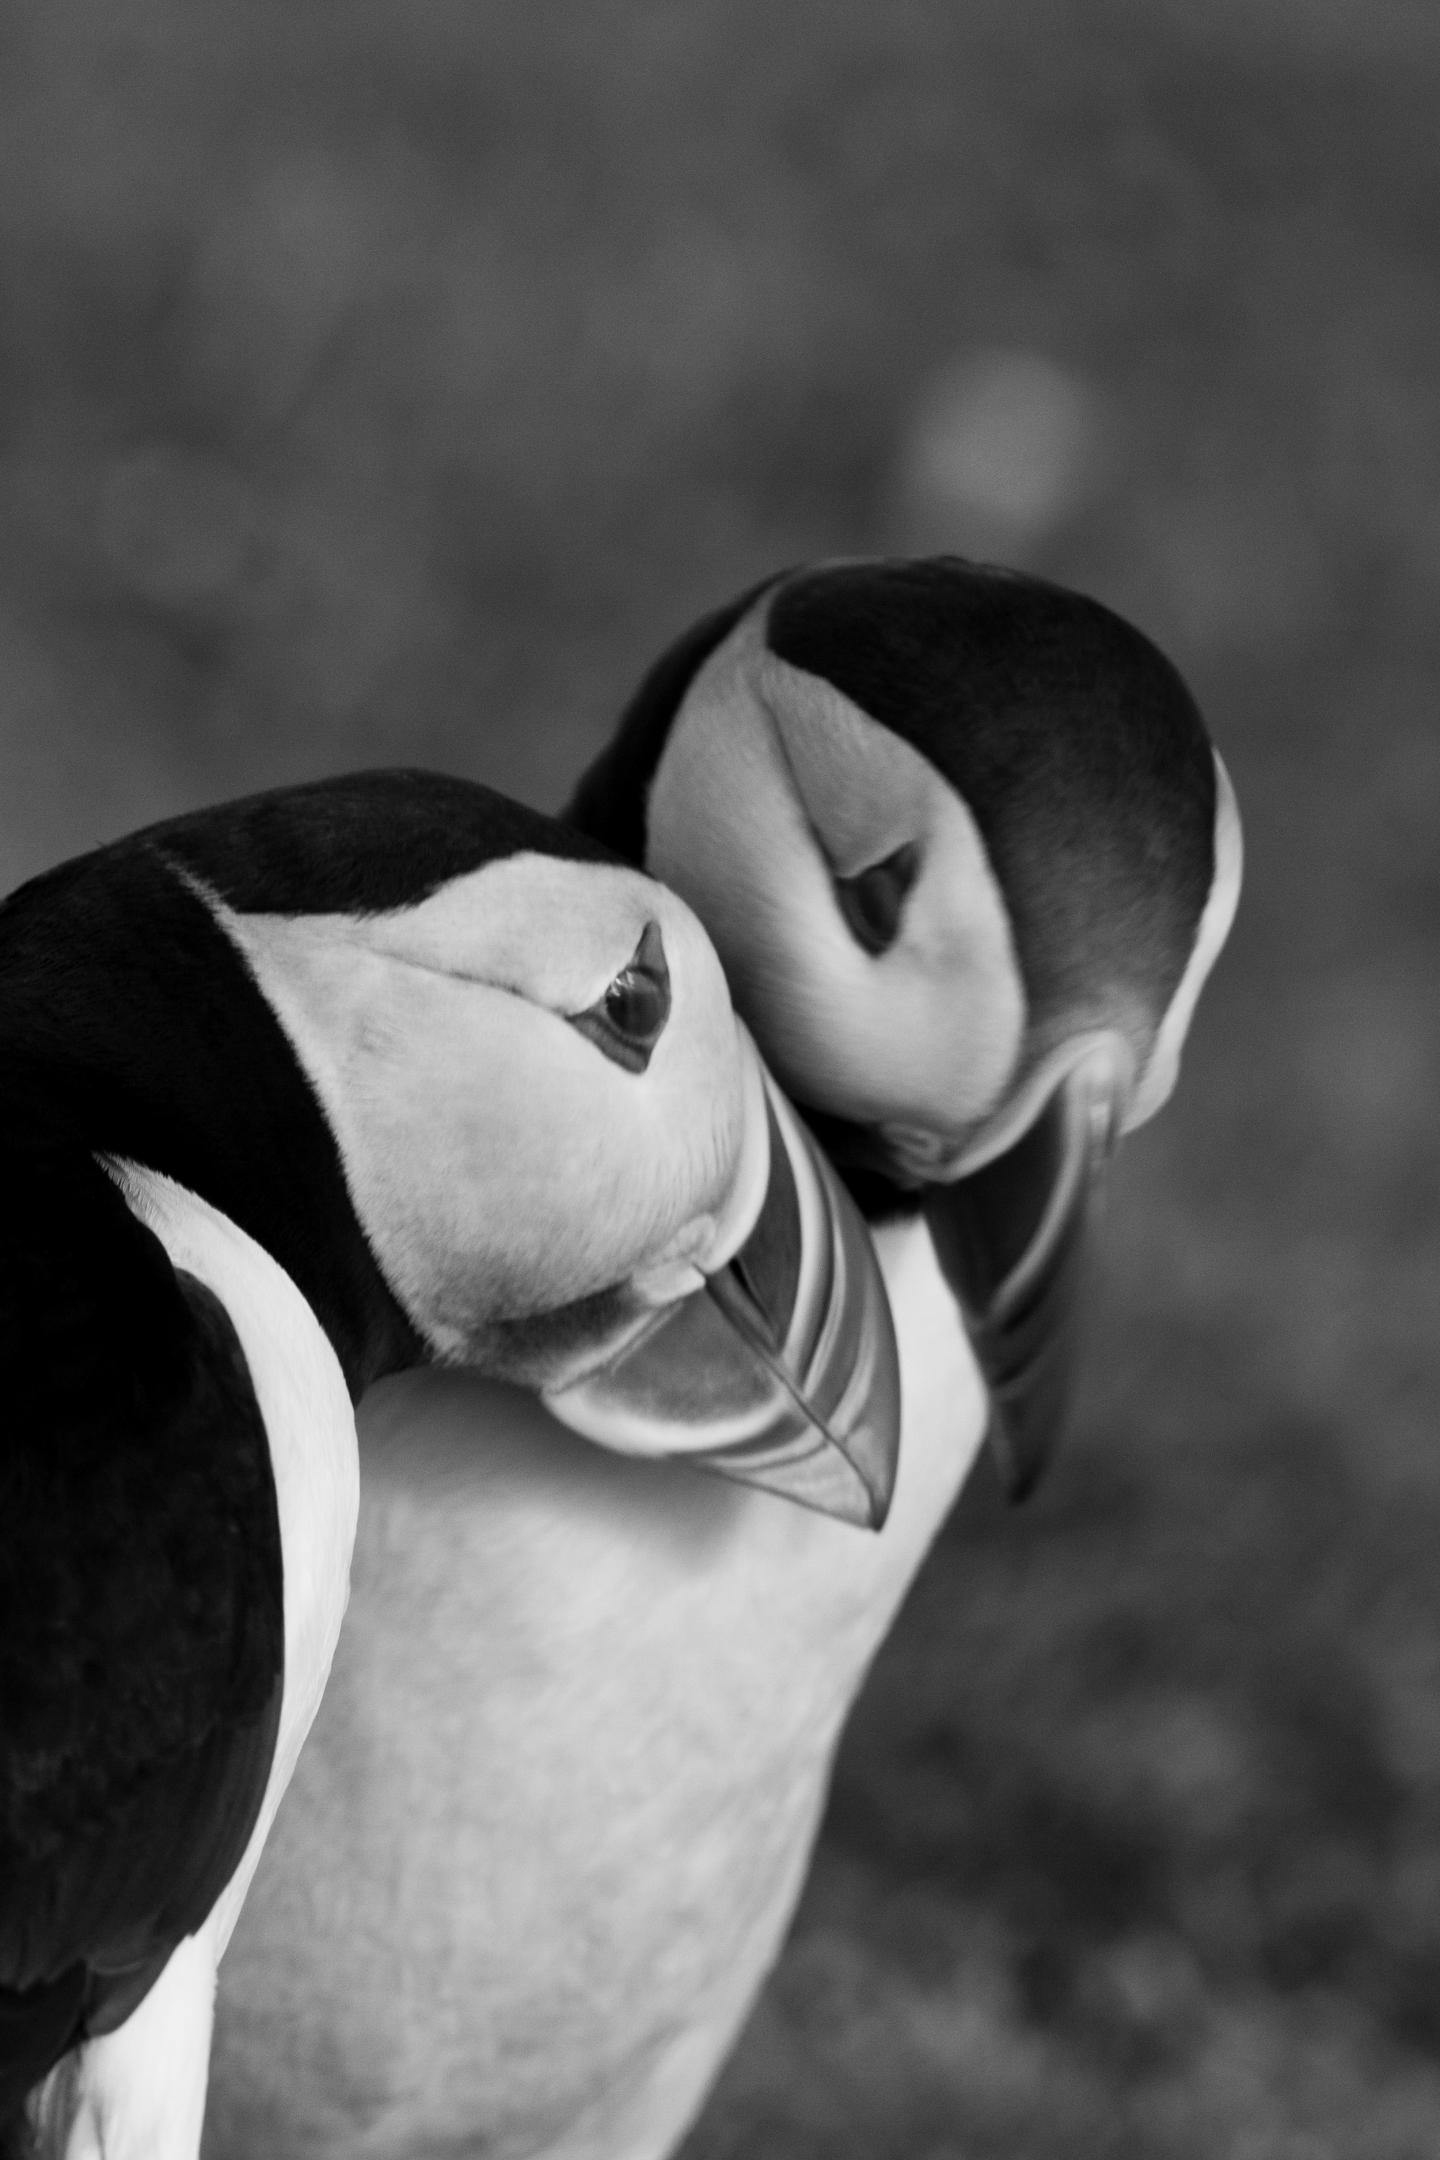 Lady Puffins Basically Holding Everything Together In Puffin Marriages